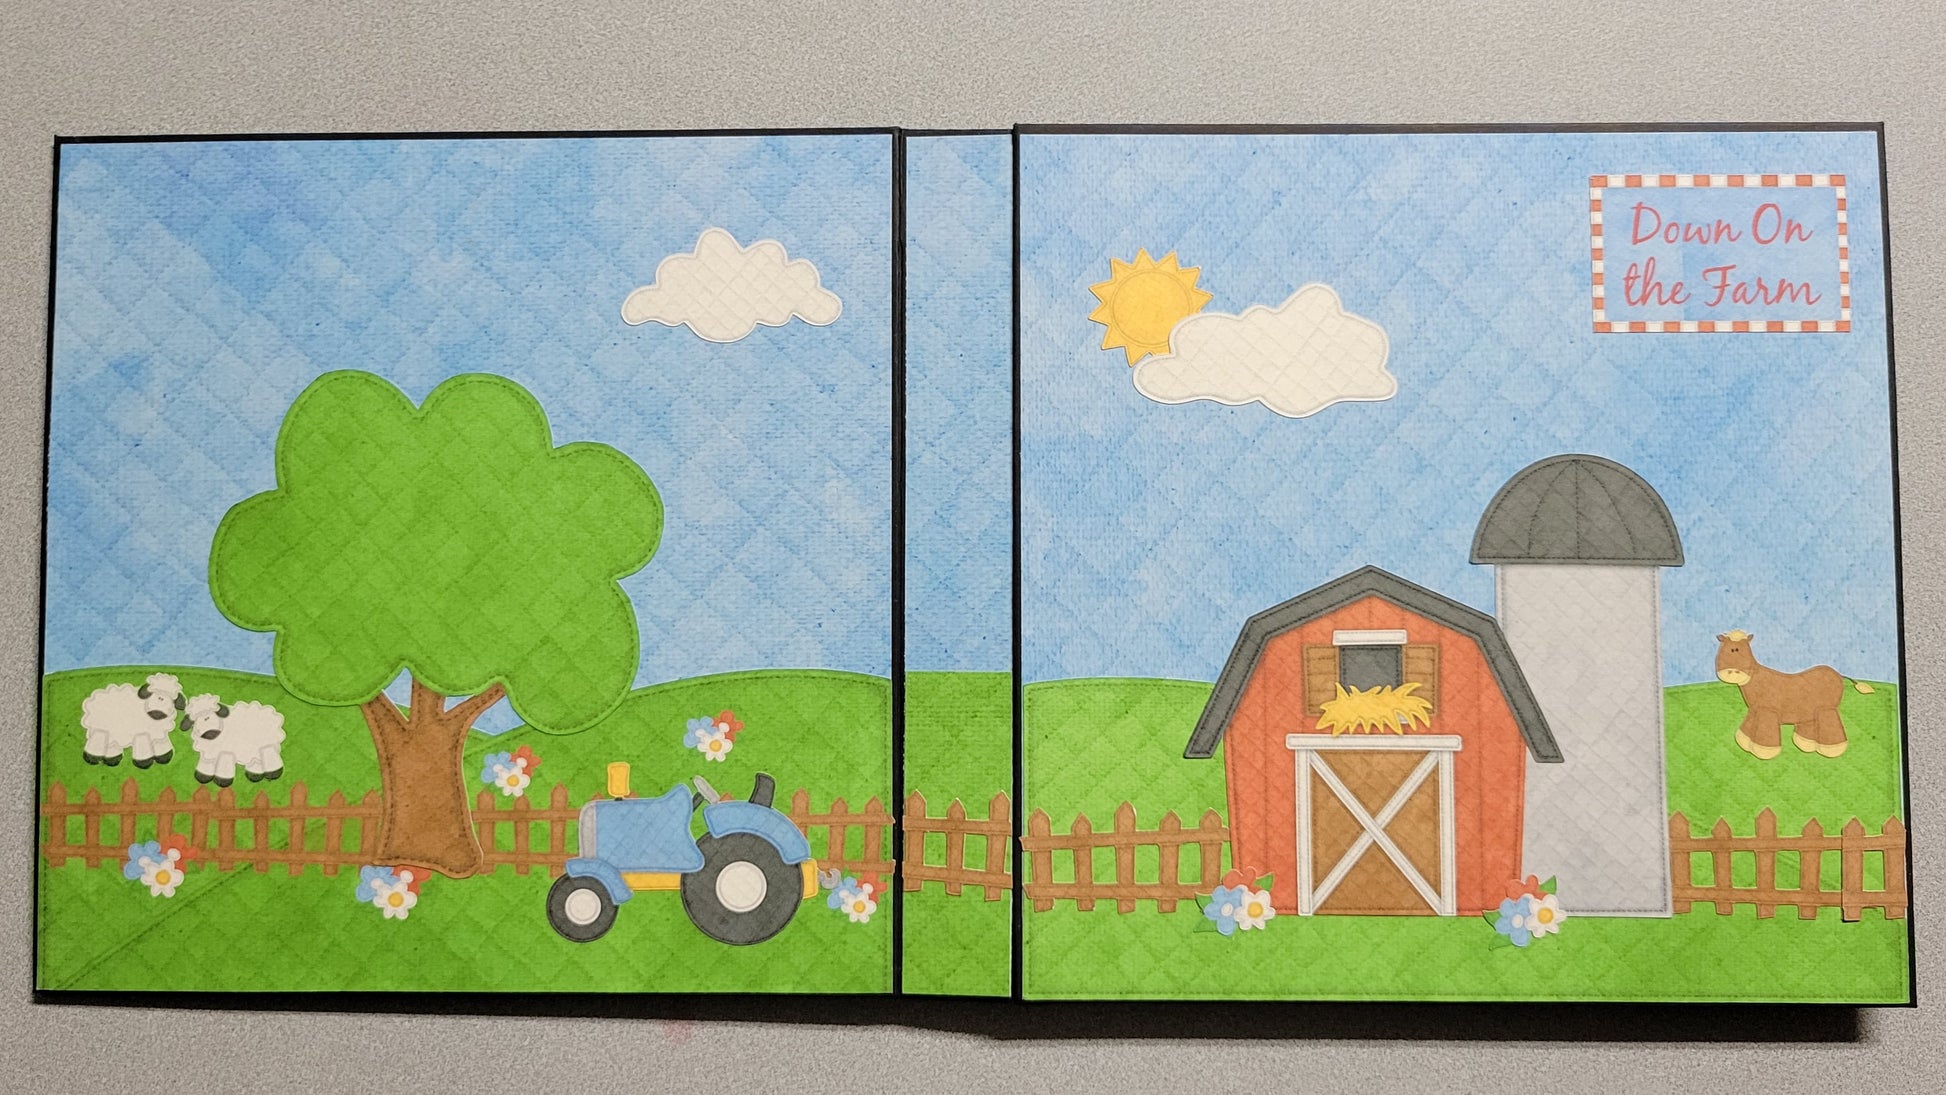 Down on the Farm Photo Album front and back cover.